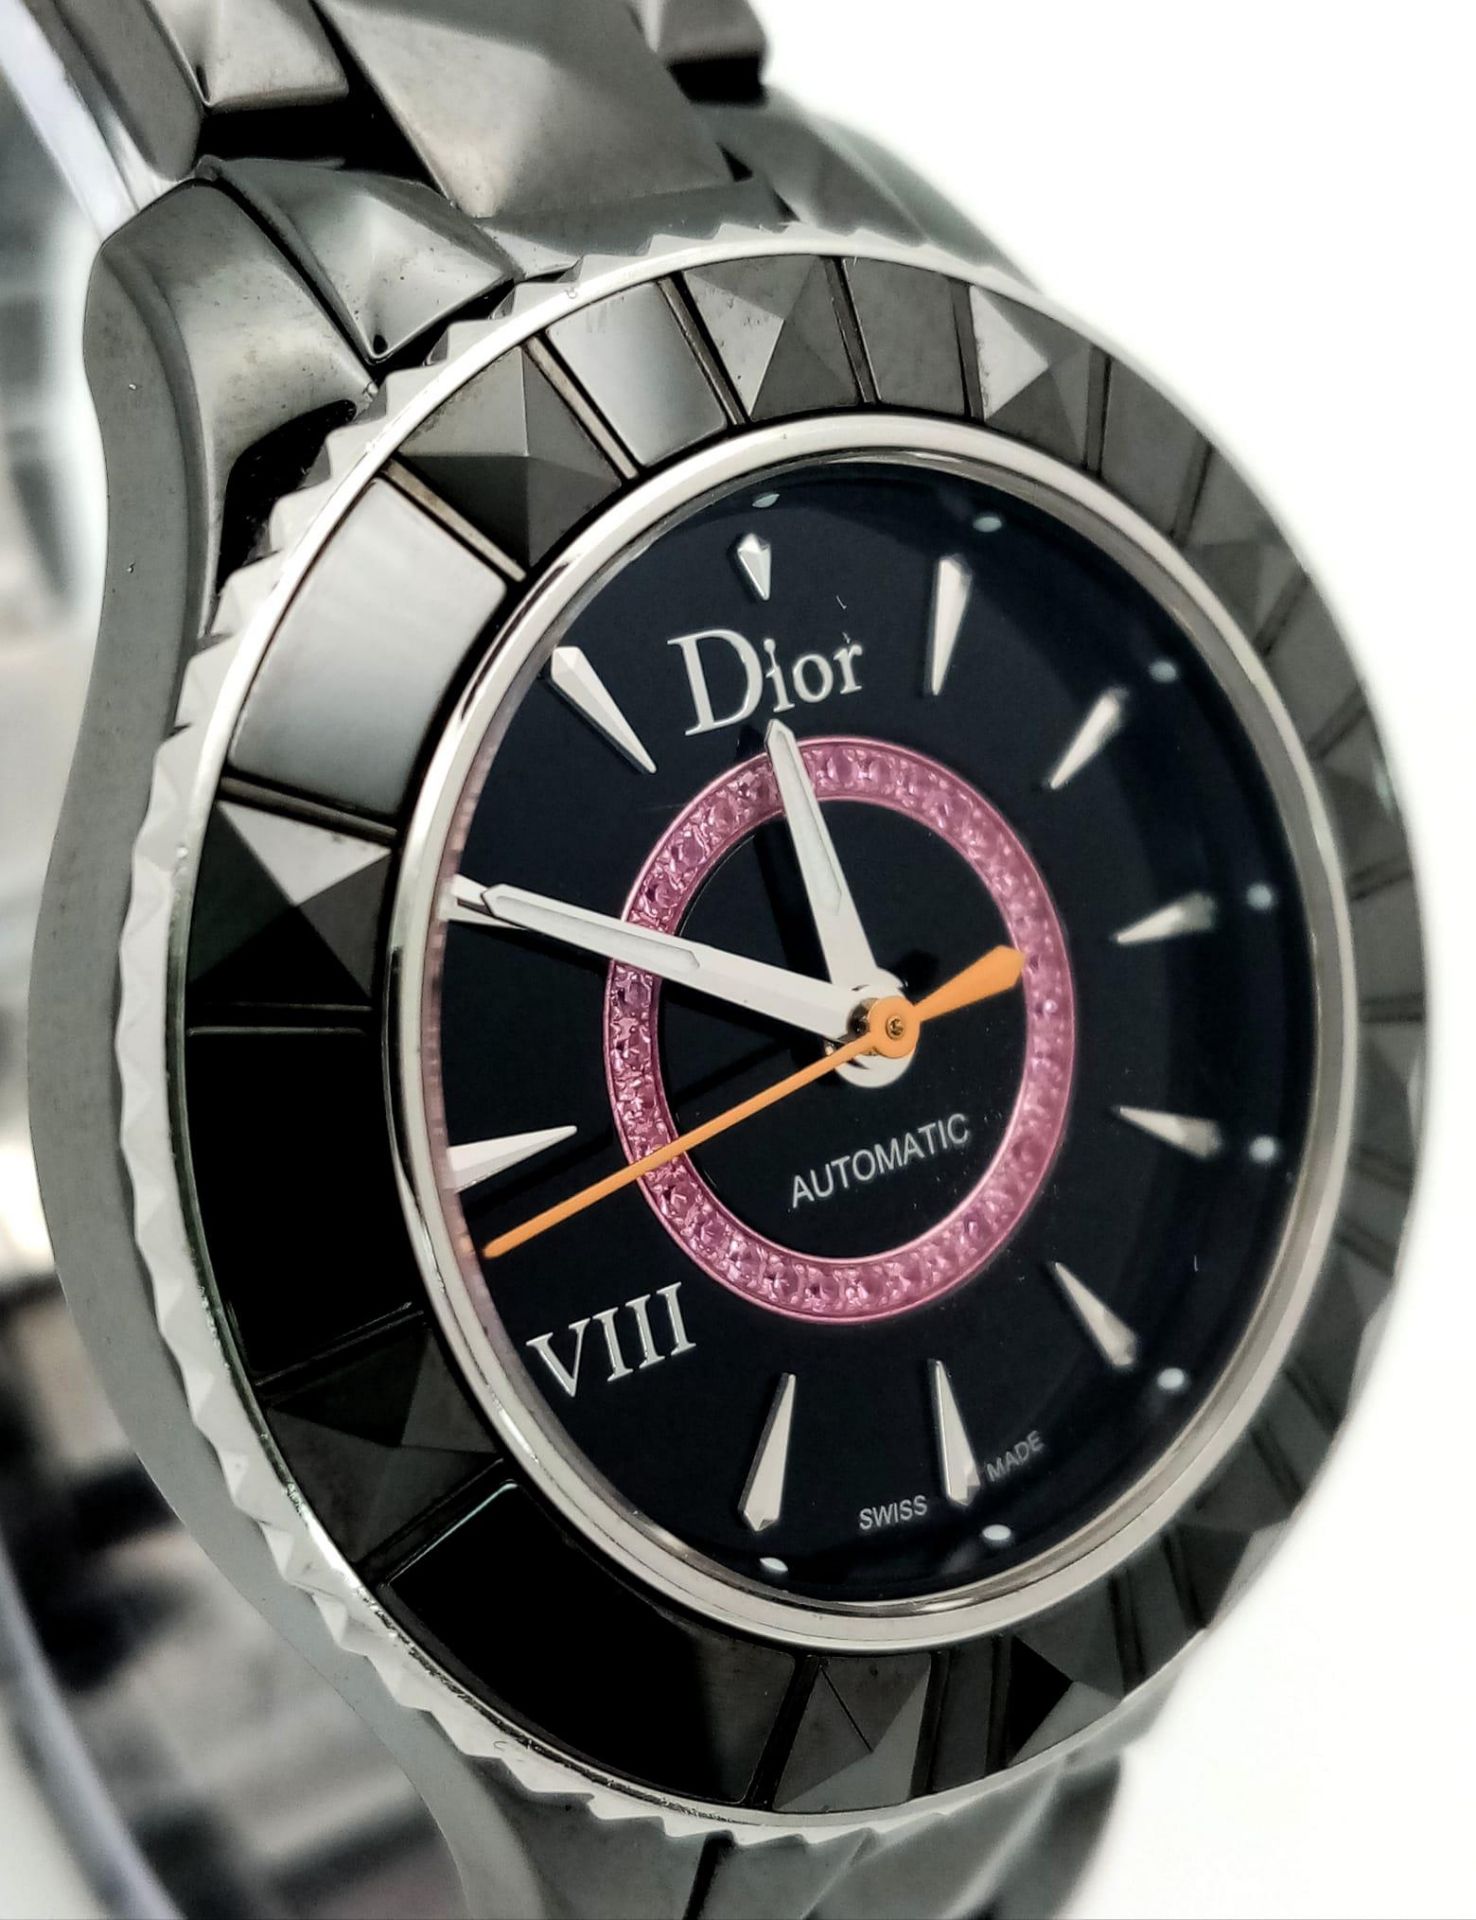 A Christian Dior VIII Automatic Ladies Watch. Black ceramic bracelet and case - 34mm. Black dial - Image 3 of 10